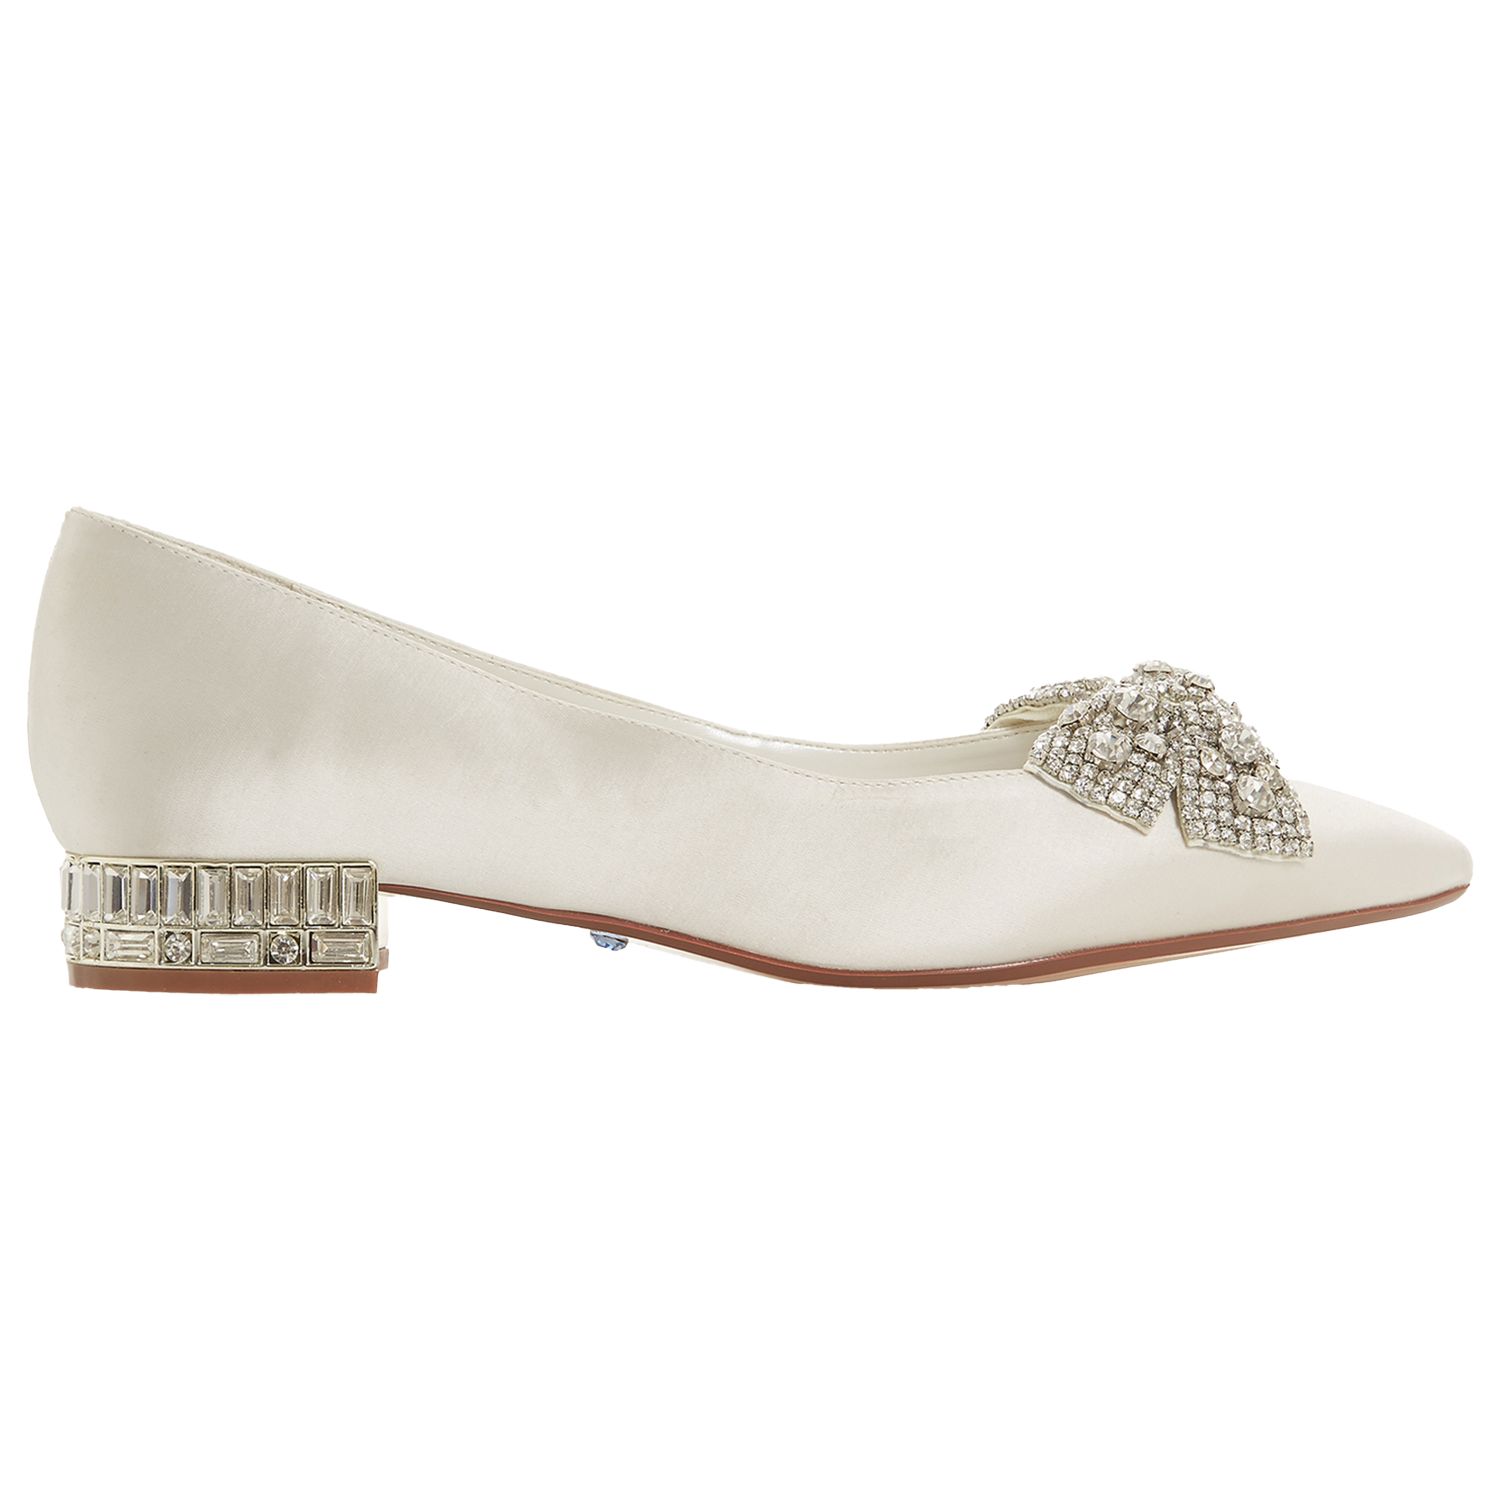 Dune Bridal Collection Bow Tie Ballet Pumps, Ivory